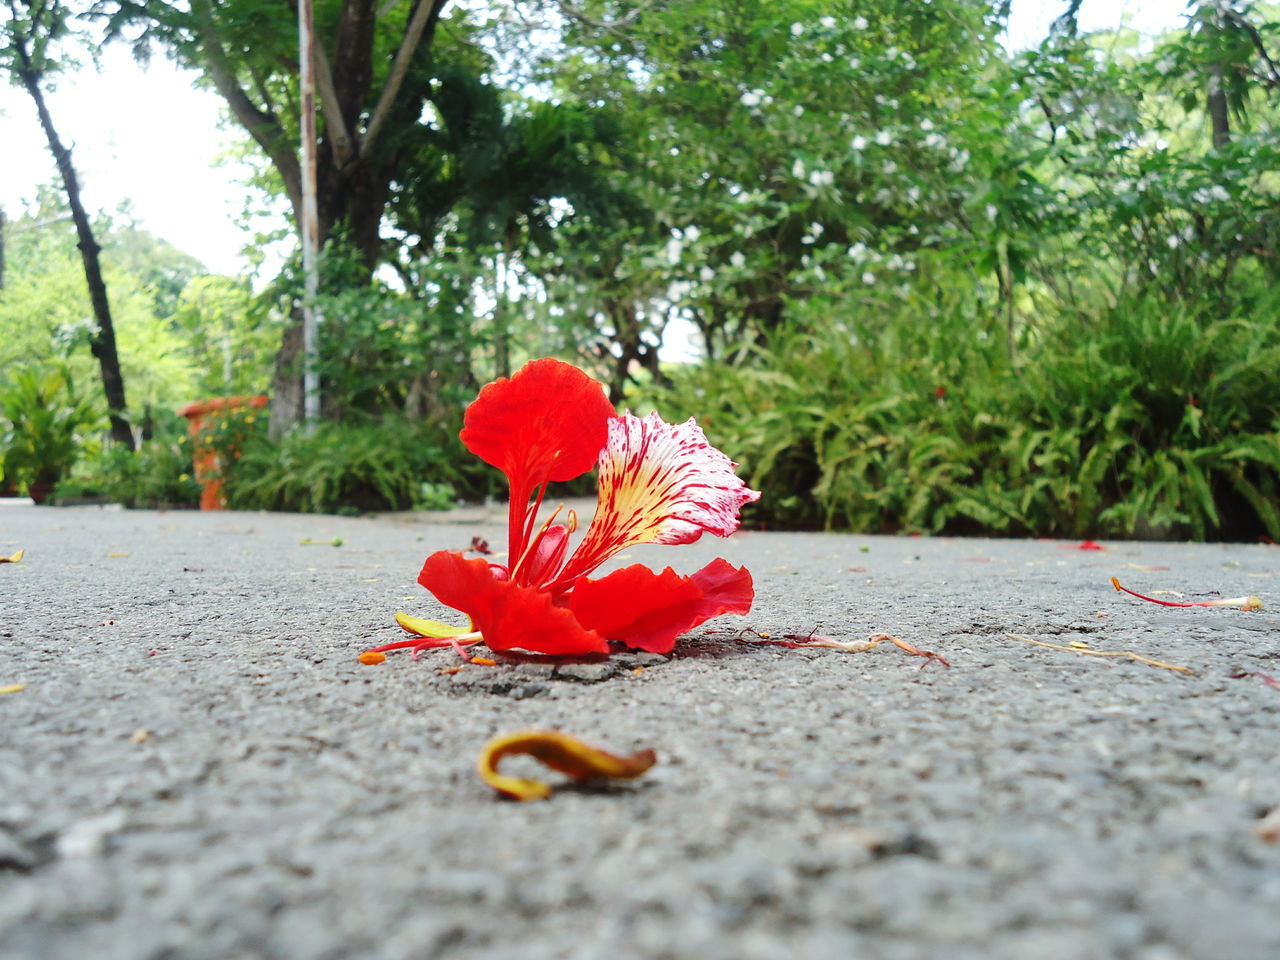 red, flower, petal, growth, fragility, flower head, nature, tree, plant, beauty in nature, selective focus, surface level, close-up, day, focus on foreground, no people, outdoors, blooming, tranquility, in bloom, green color, the way forward, blossom, pollen, botany, pink color, park